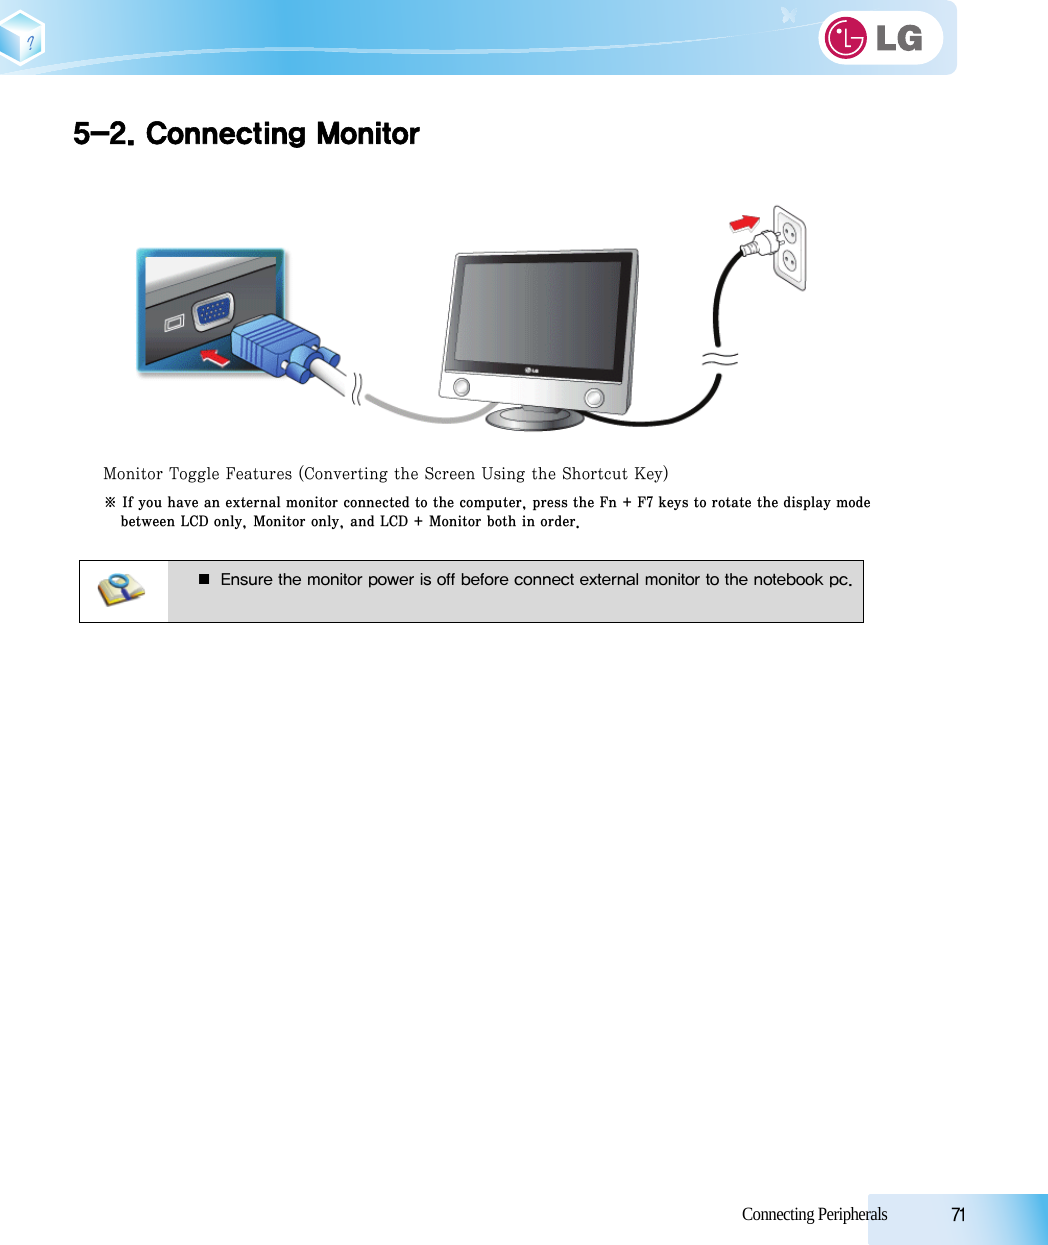 Connecting Peripherals            715-2. Connecting Monitor Monitor Toggle Features (Converting the Screen Using the Shortcut Key) ※ If you have an external monitor connected to the computer, press the Fn + F7 keys to rotate the display modebetween LCD only, Monitor only, and LCD + Monitor both in order.■ Ensure the monitor power is off before connect external monitor to the notebook pc.